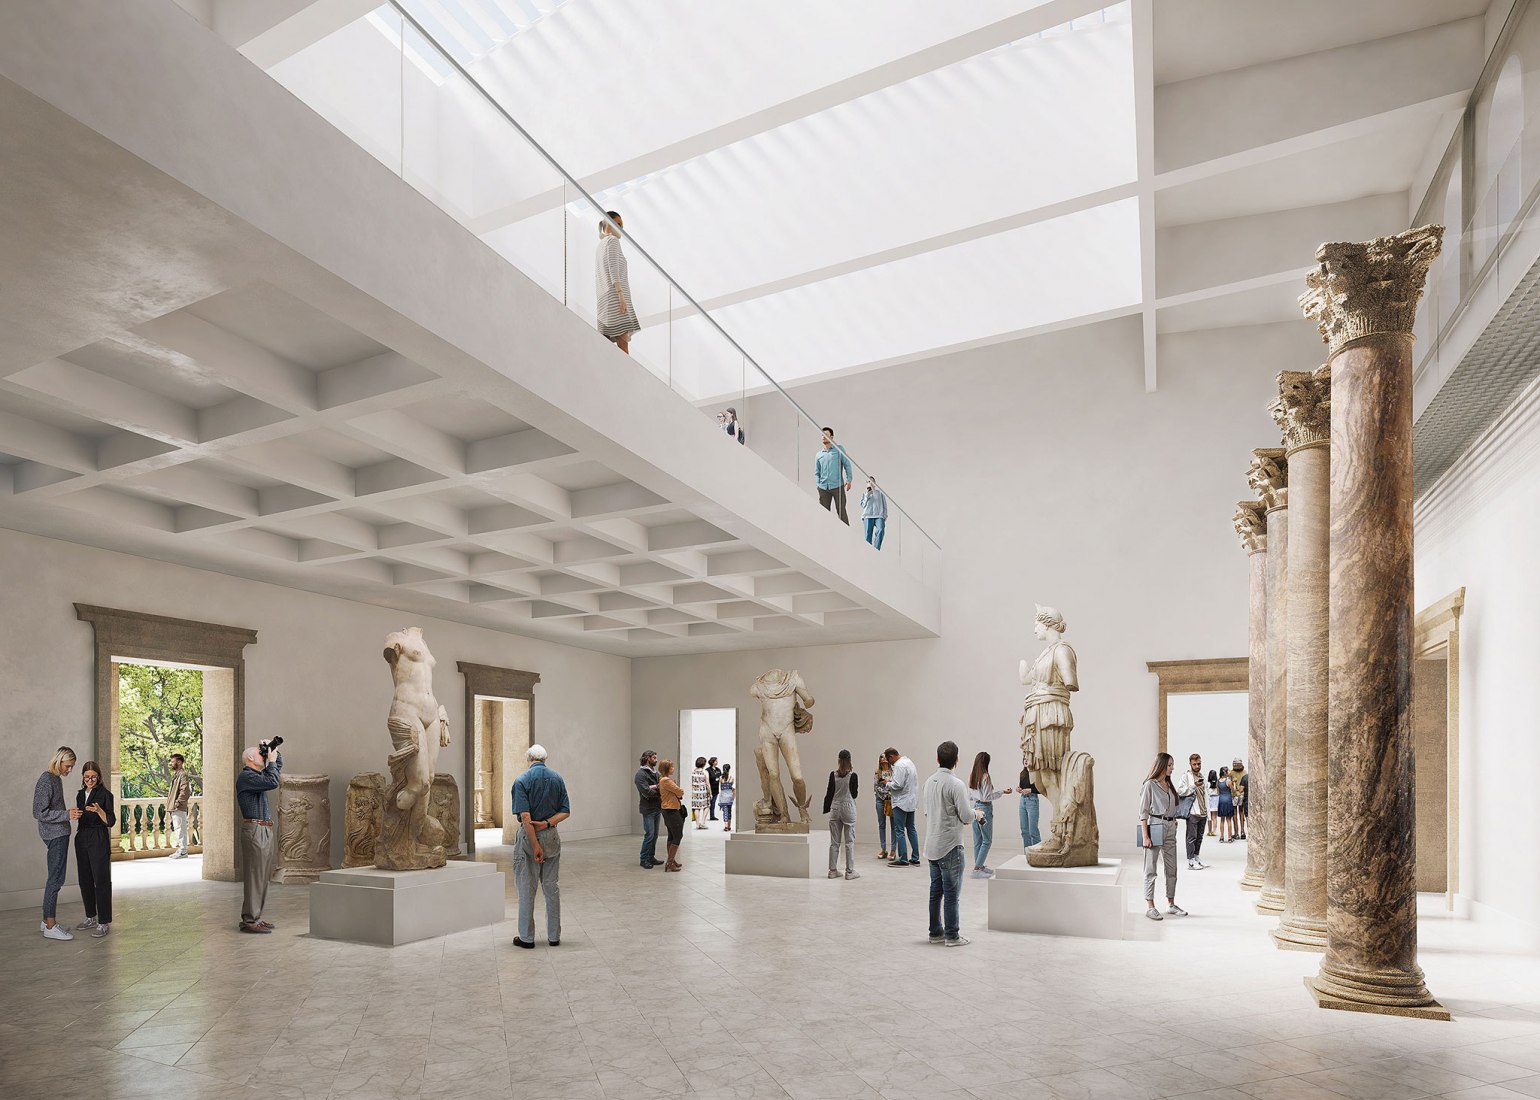 Rendering. Renovation of the Archaeological Museum of Seville by Guillermo Vázquez Consuegra.